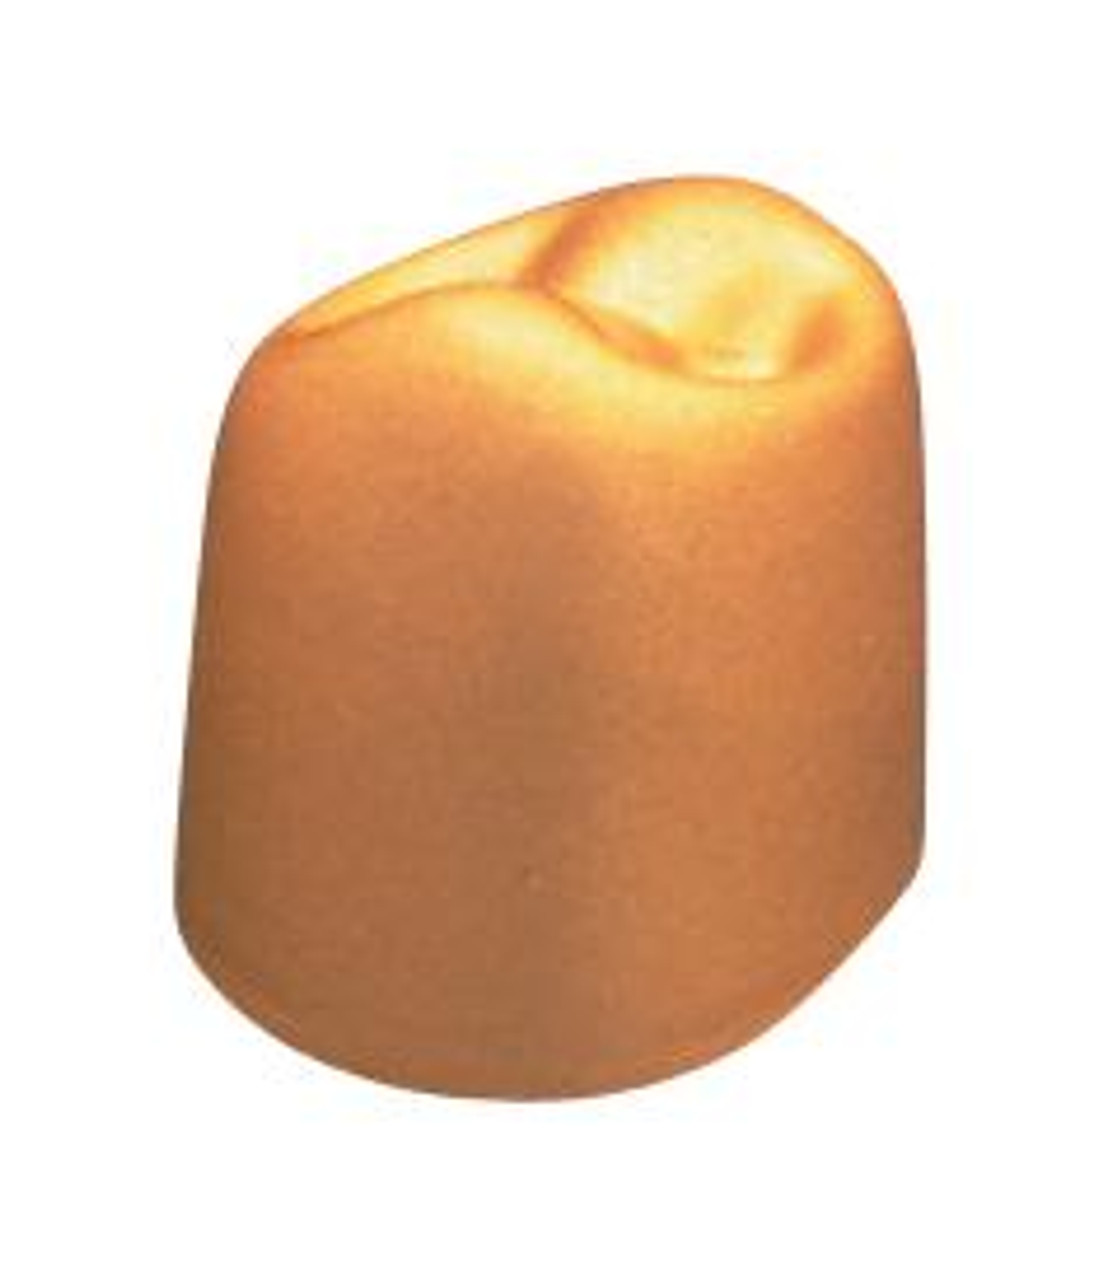 3M Gold Anodized Temporary Bicuspid Crowns, 940540, Lower Right FirstBicuspid, Size 0, 5 Crowns